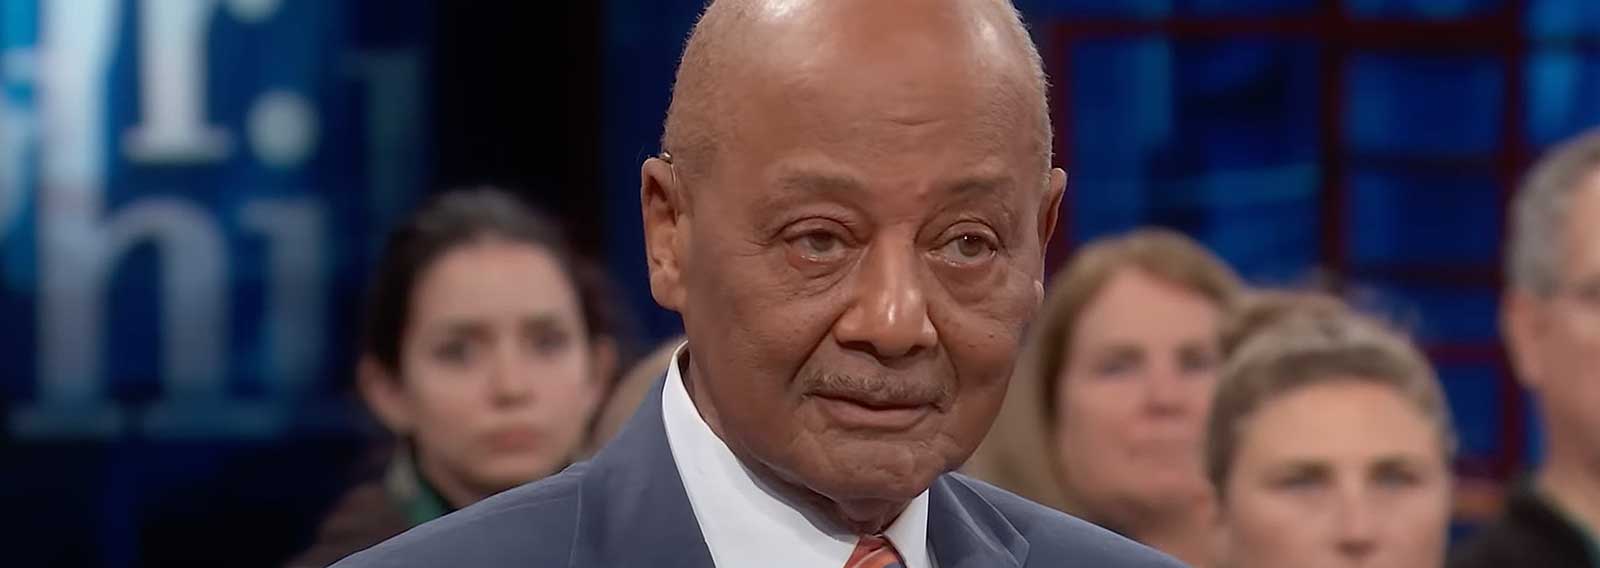 Civil Rights Activist Leaves Audience Speechless: “Look Beyond Race… America Is Drowning Because It’s in Moral and Spiritual Freefall”